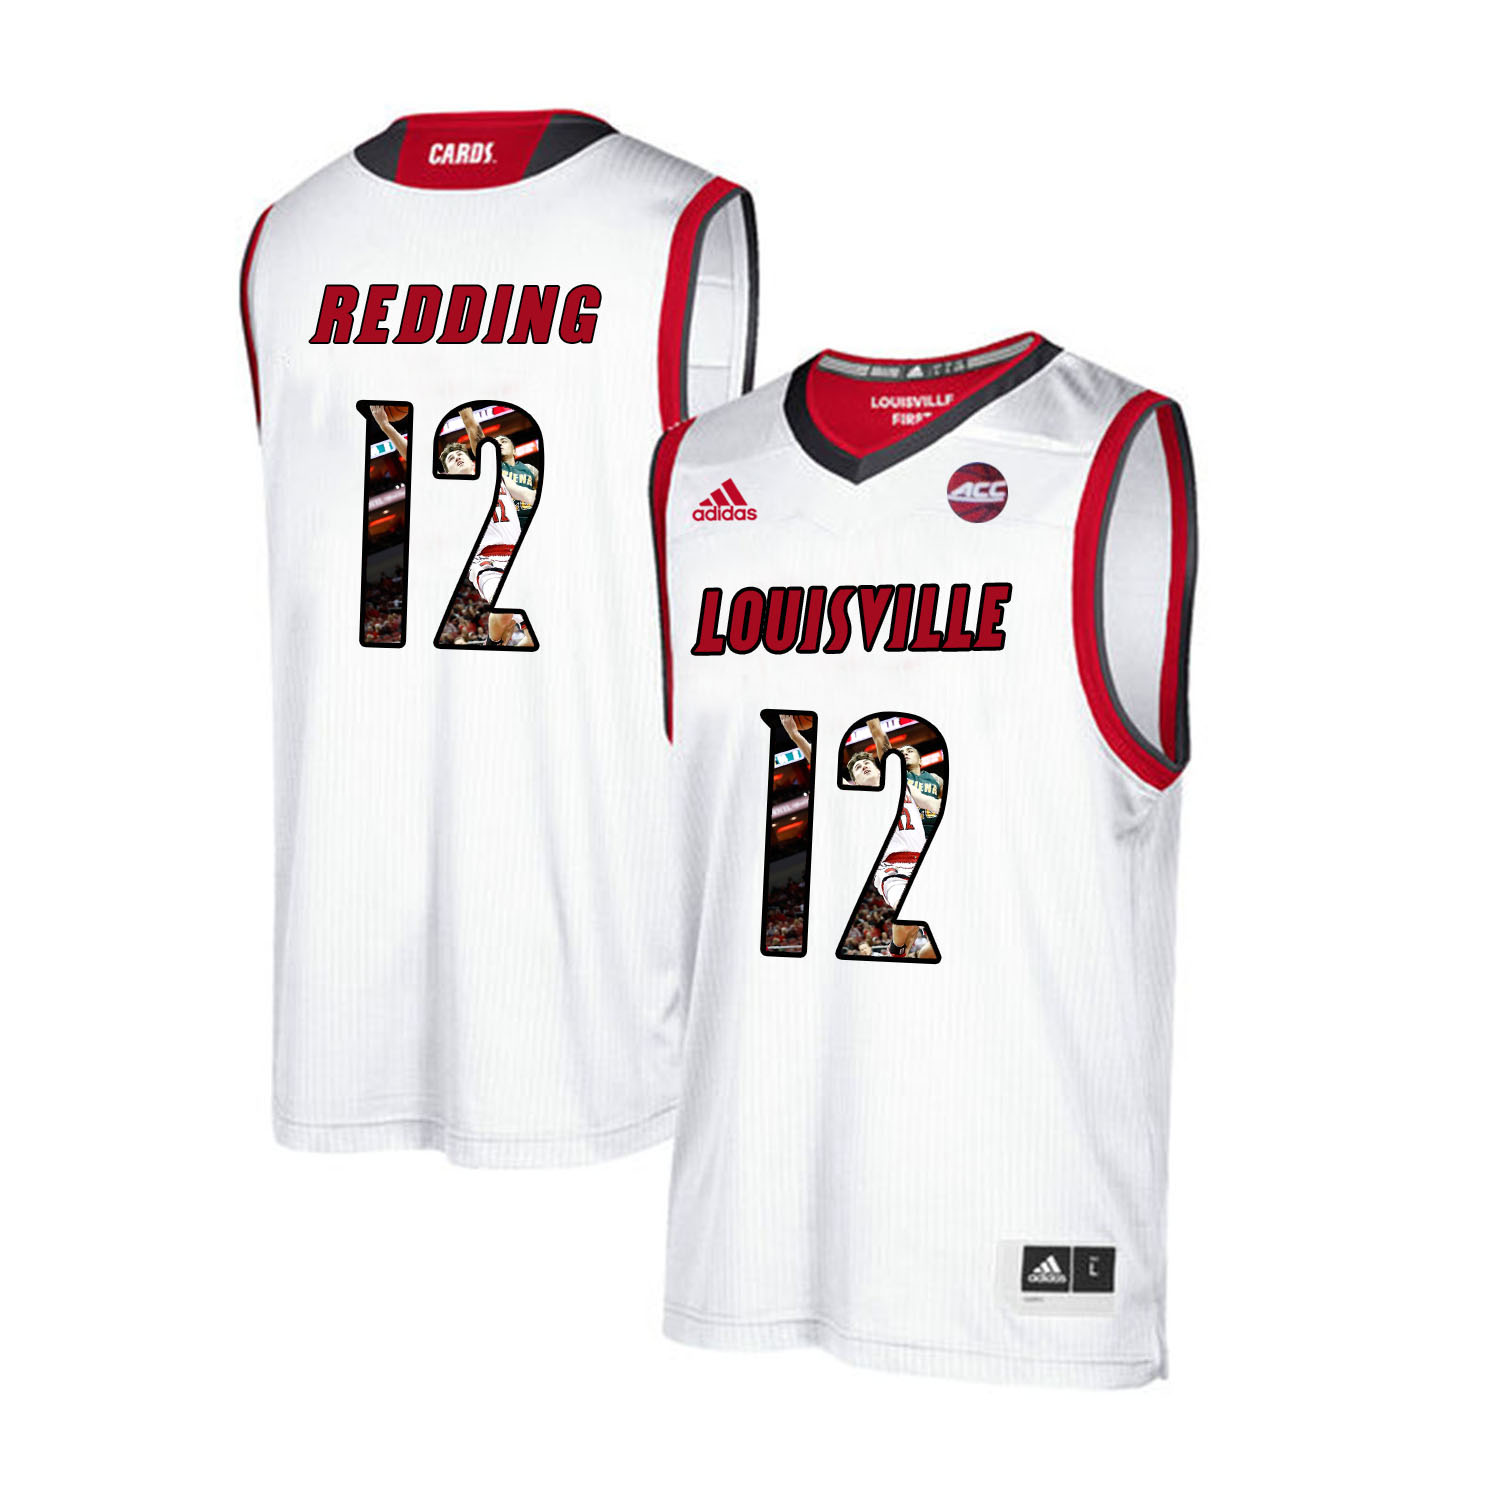 Louisville Cardinals 12 Jacob Redding White With Portrait Print College Basketball Jersey